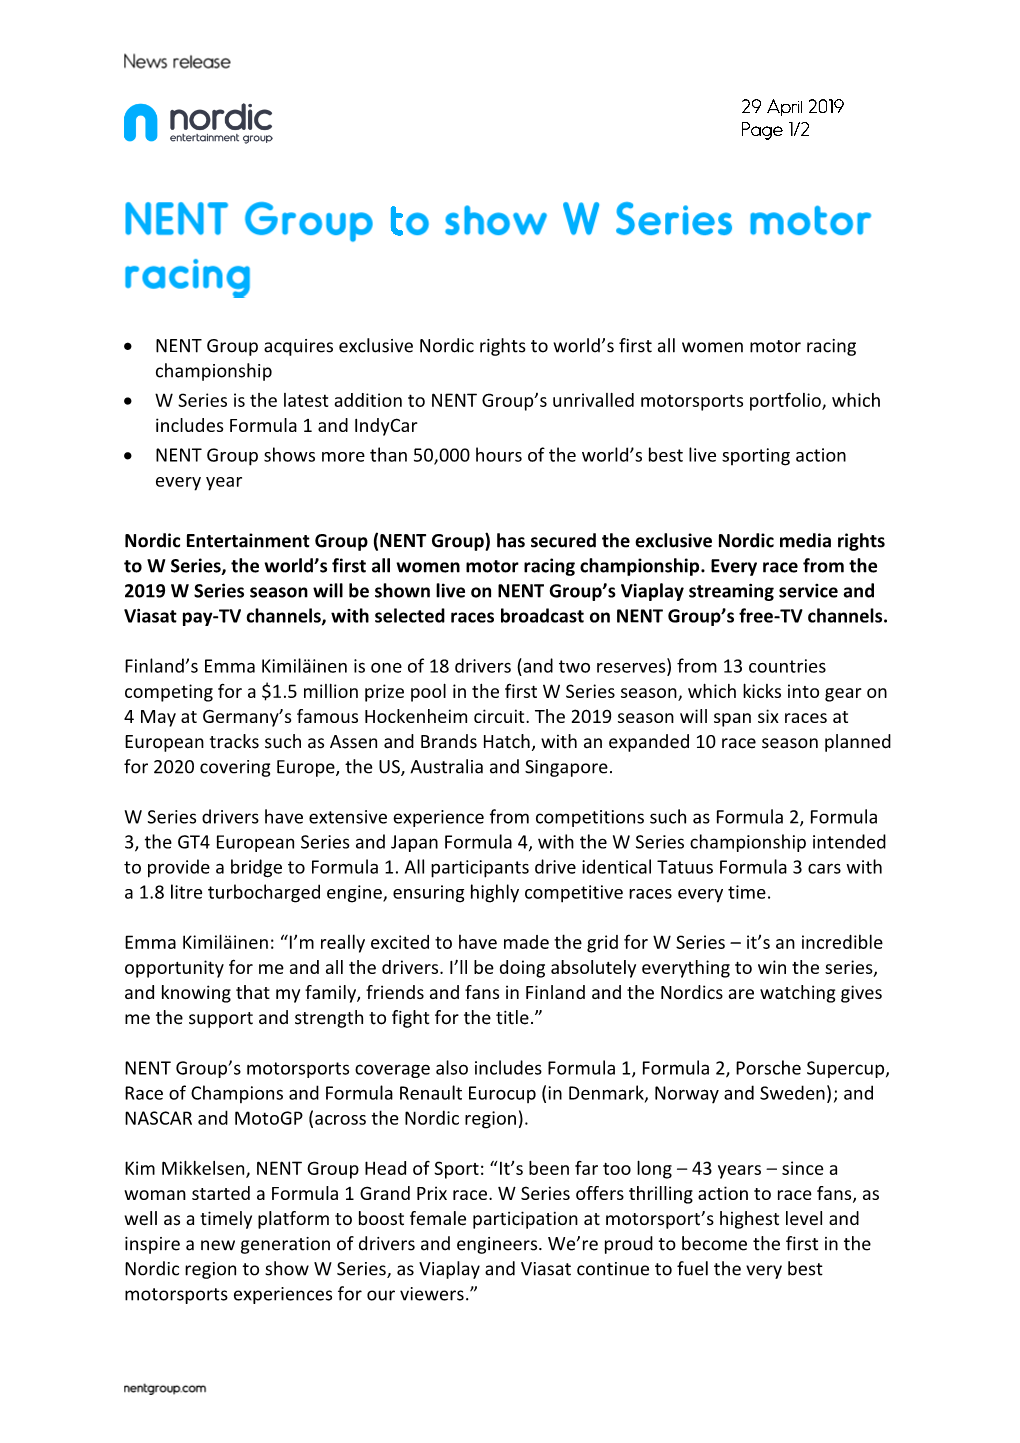 • NENT Group Acquires Exclusive Nordic Rights to World's First All Women Motor Racing Championship • W Series Is the Lates